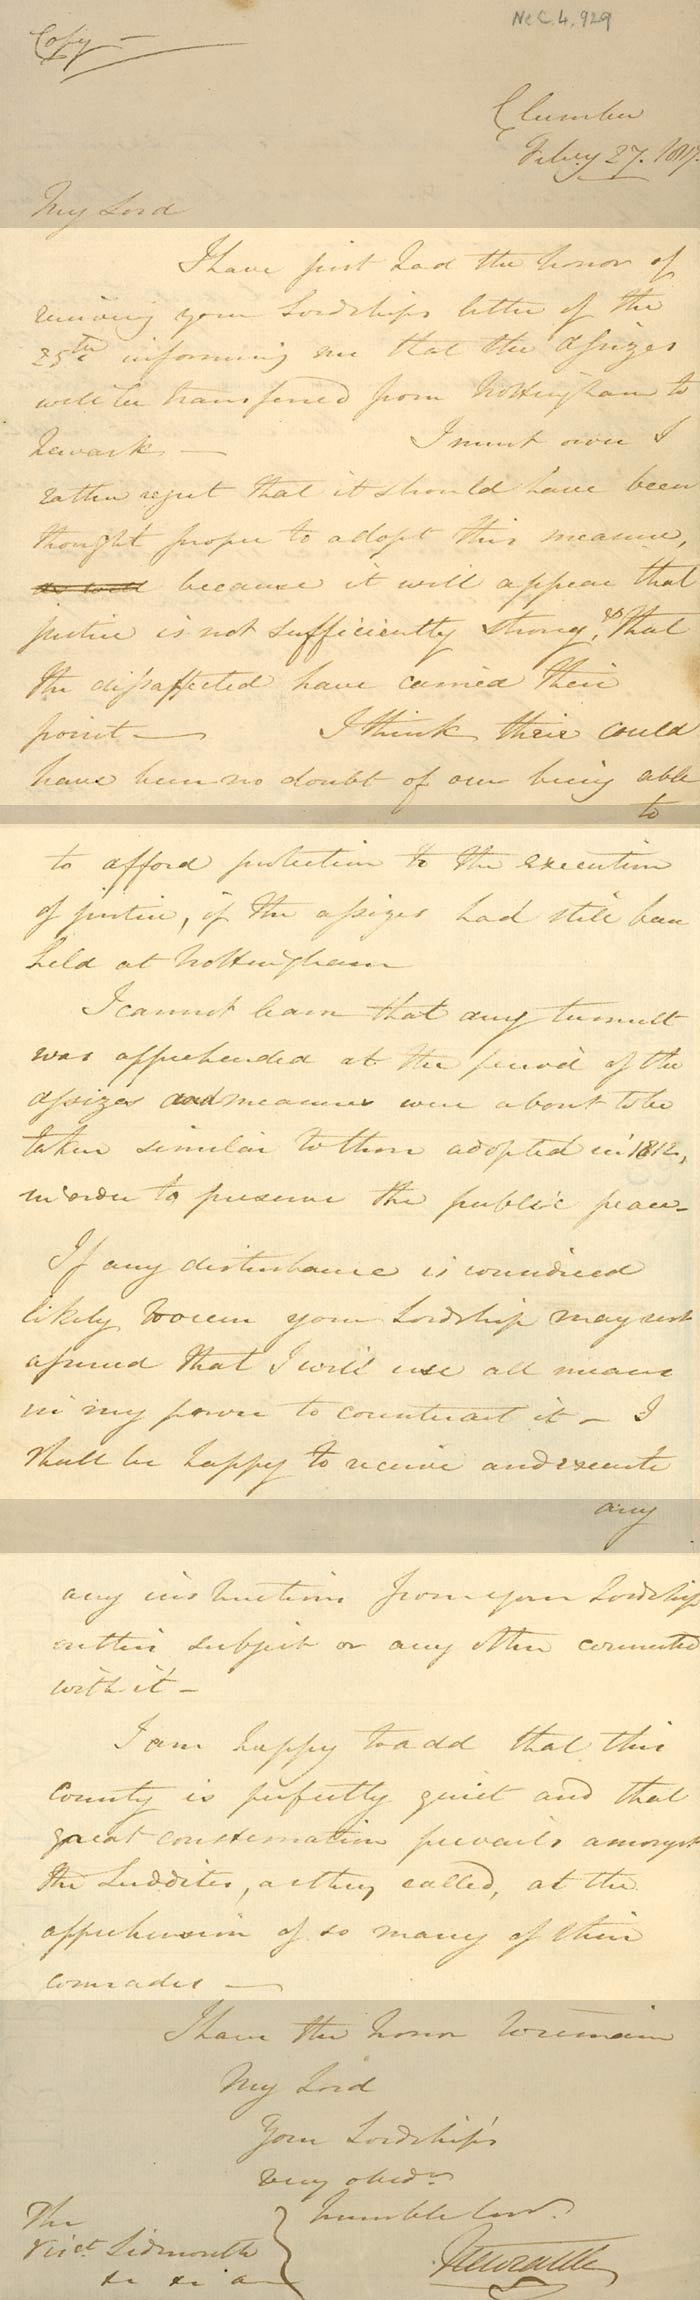 Letter from Newcastle, Clumber, to Lord Sidmouth (Home Secretary), 27 February 1817 (Ne C 4929)